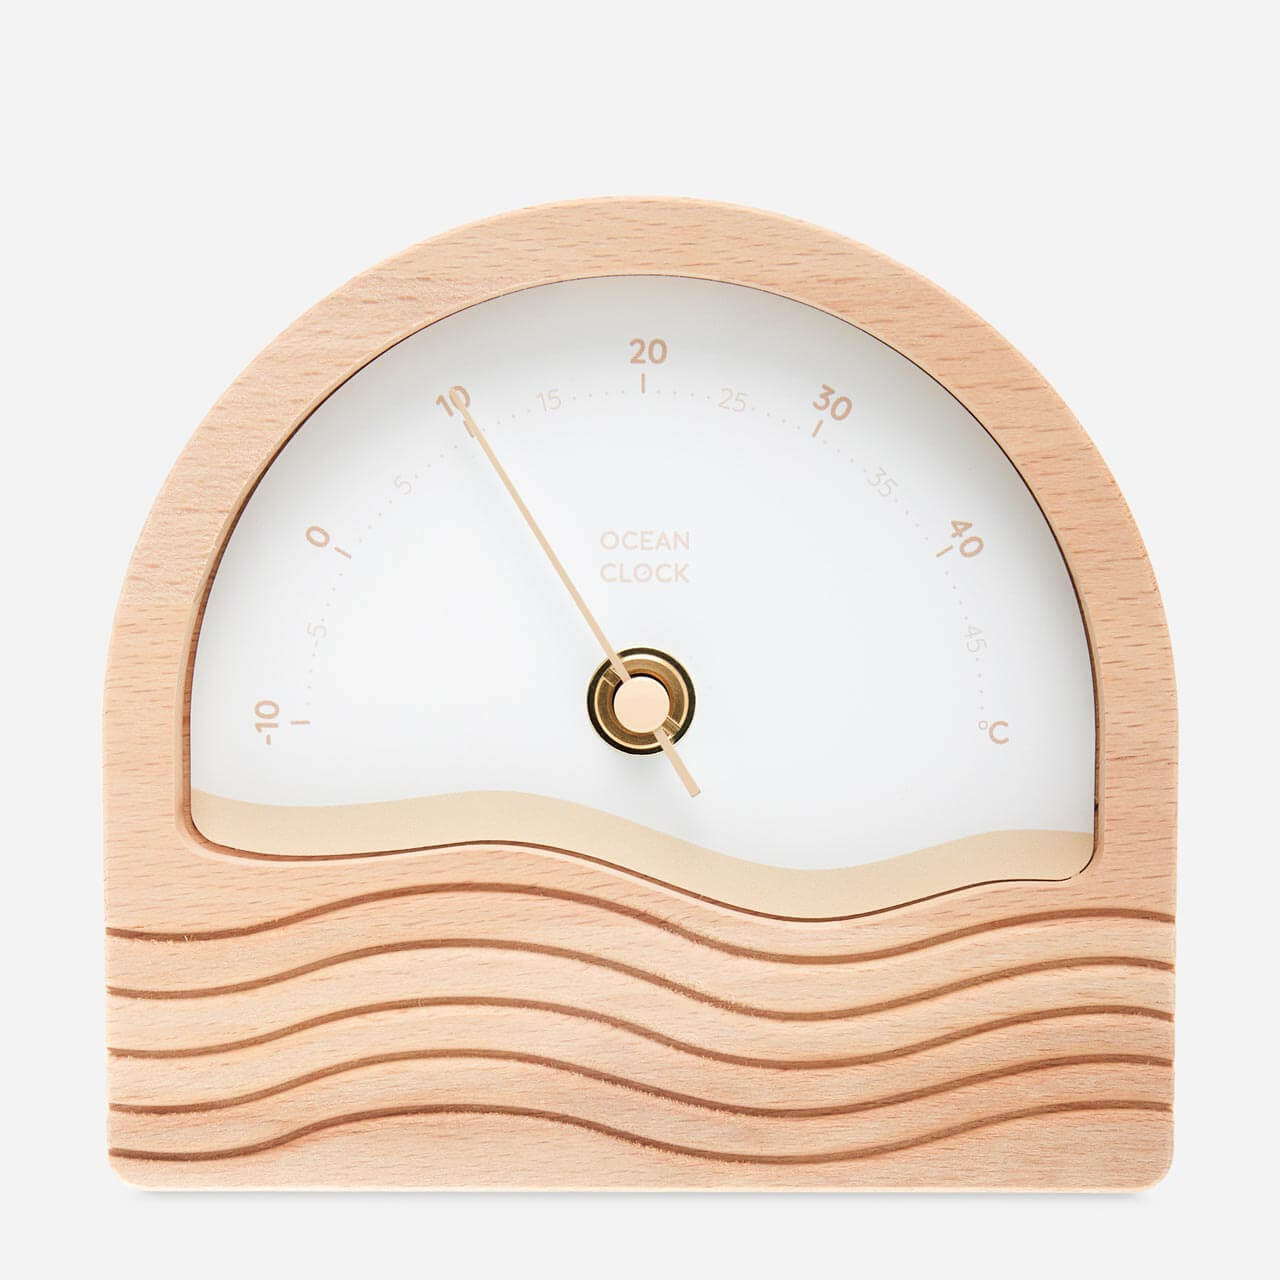 wooden thermometer with ecru and beige dial in celsius